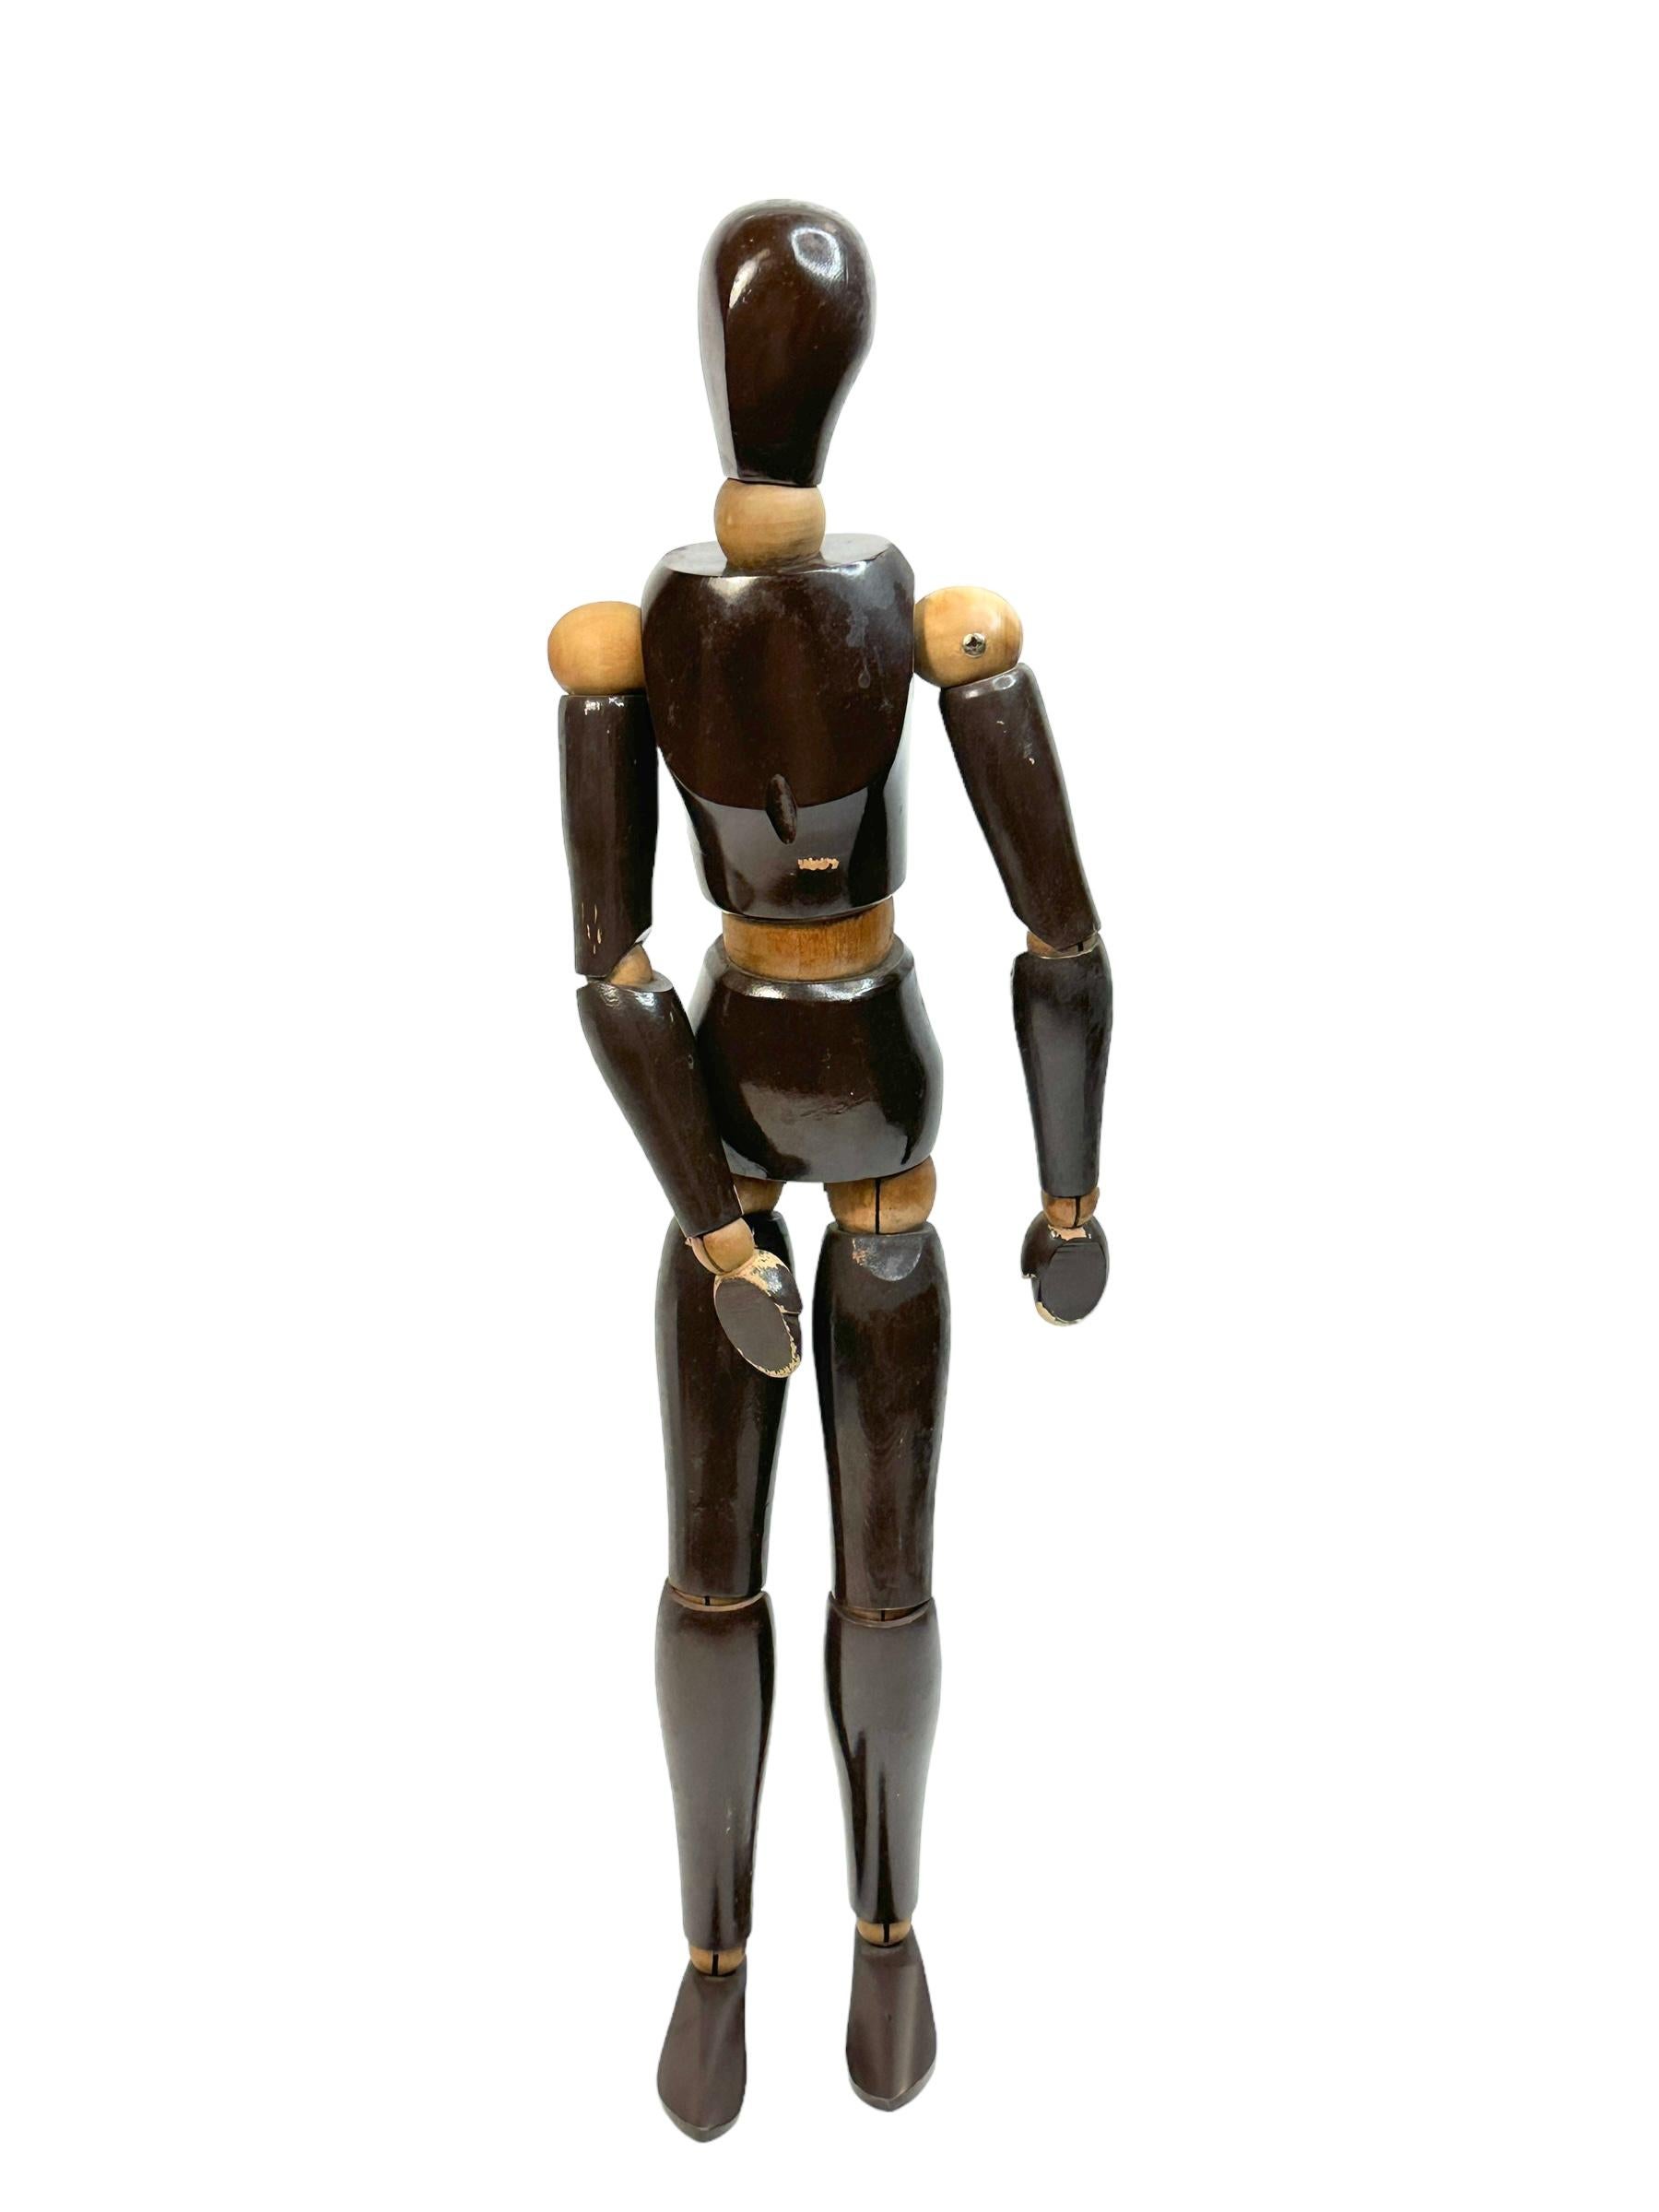 Large Art Deco Traditional Wooden Artist Mannequin Model, Italy 1930s For Sale 4